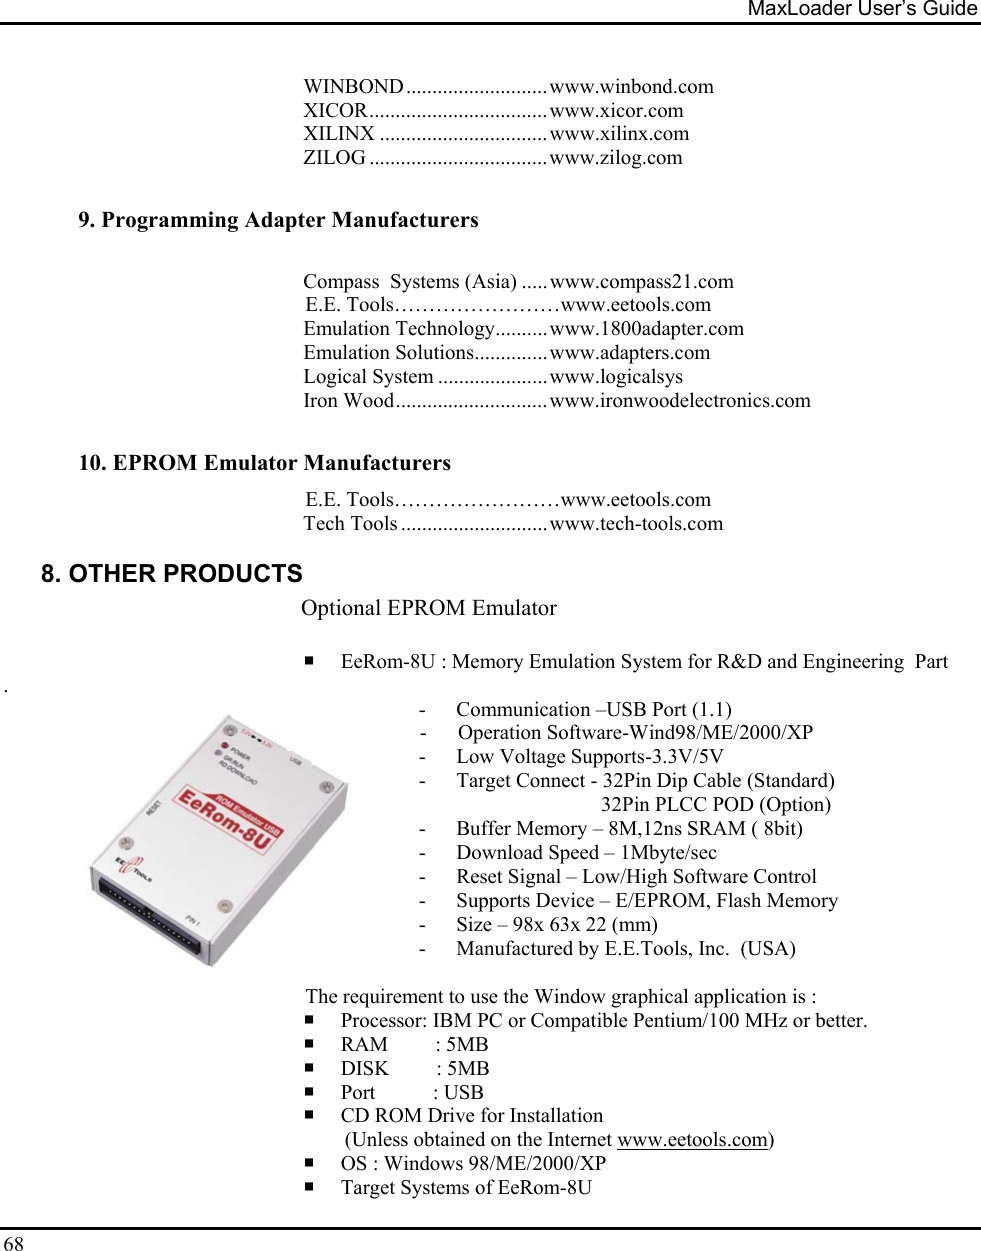 MaxLoader User’s Guide  68 WINBOND...........................www.winbond.com XICOR..................................www.xicor.com XILINX ................................www.xilinx.com ZILOG ..................................www.zilog.com   9. Programming Adapter Manufacturers    Compass  Systems (Asia) .....www.compass21.com E.E. Tools……………………www.eetools.com Emulation Technology..........www.1800adapter.com Emulation Solutions..............www.adapters.com Logical System .....................www.logicalsys Iron Wood.............................www.ironwoodelectronics.com  10. EPROM Emulator Manufacturers E.E. Tools……………………www.eetools.com Tech Tools ............................www.tech-tools.com  8. OTHER PRODUCTS Optional EPROM Emulator                                                          EeRom-8U : Memory Emulation System for R&amp;D and Engineering  Part .                               - Communication –USB Port (1.1)                                                                                 -      Operation Software-Wind98/ME/2000/XP - Low Voltage Supports-3.3V/5V - Target Connect - 32Pin Dip Cable (Standard)                                    32Pin PLCC POD (Option) - Buffer Memory – 8M,12ns SRAM ( 8bit) - Download Speed – 1Mbyte/sec - Reset Signal – Low/High Software Control - Supports Device – E/EPROM, Flash Memory - Size – 98x 63x 22 (mm) - Manufactured by E.E.Tools, Inc.  (USA)                                                            The requirement to use the Window graphical application is :  Processor: IBM PC or Compatible Pentium/100 MHz or better.  RAM         : 5MB  DISK         : 5MB  Port           : USB  CD ROM Drive for Installation  (Unless obtained on the Internet www.eetools.com)  OS : Windows 98/ME/2000/XP  Target Systems of EeRom-8U 